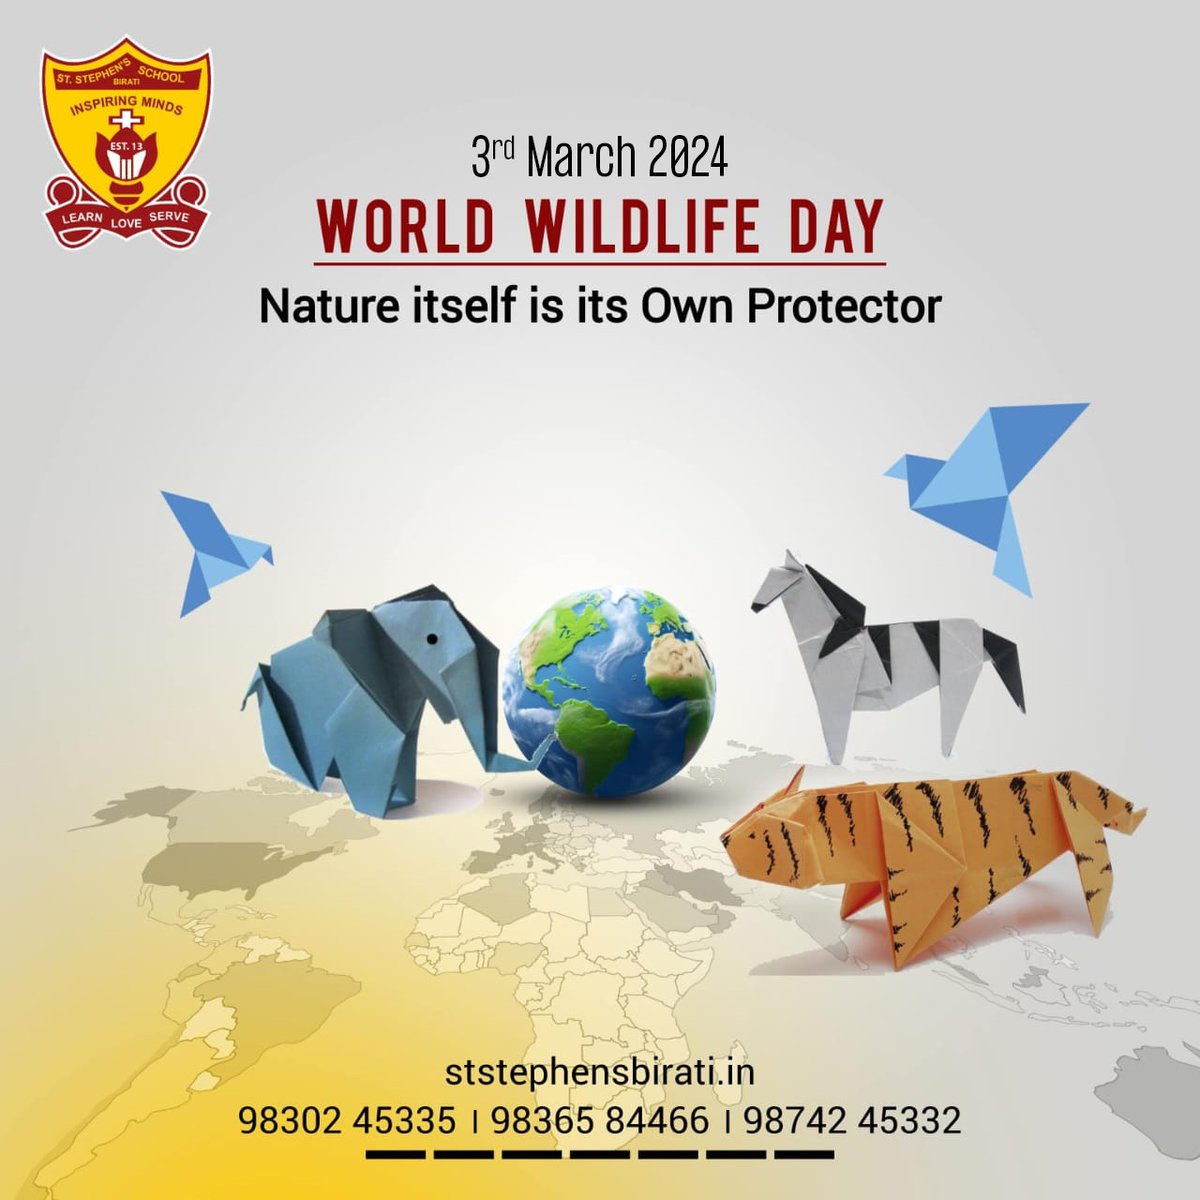 Embrace the beauty of our planet and pledge to share the responsibility of caring for the wild. Let's unite for a sustainable future, preserving the delicate balance that sustains all life. #StStephensSchool #StStephensSchoolBirati #Wildlife #WorldWildlifeDay2024